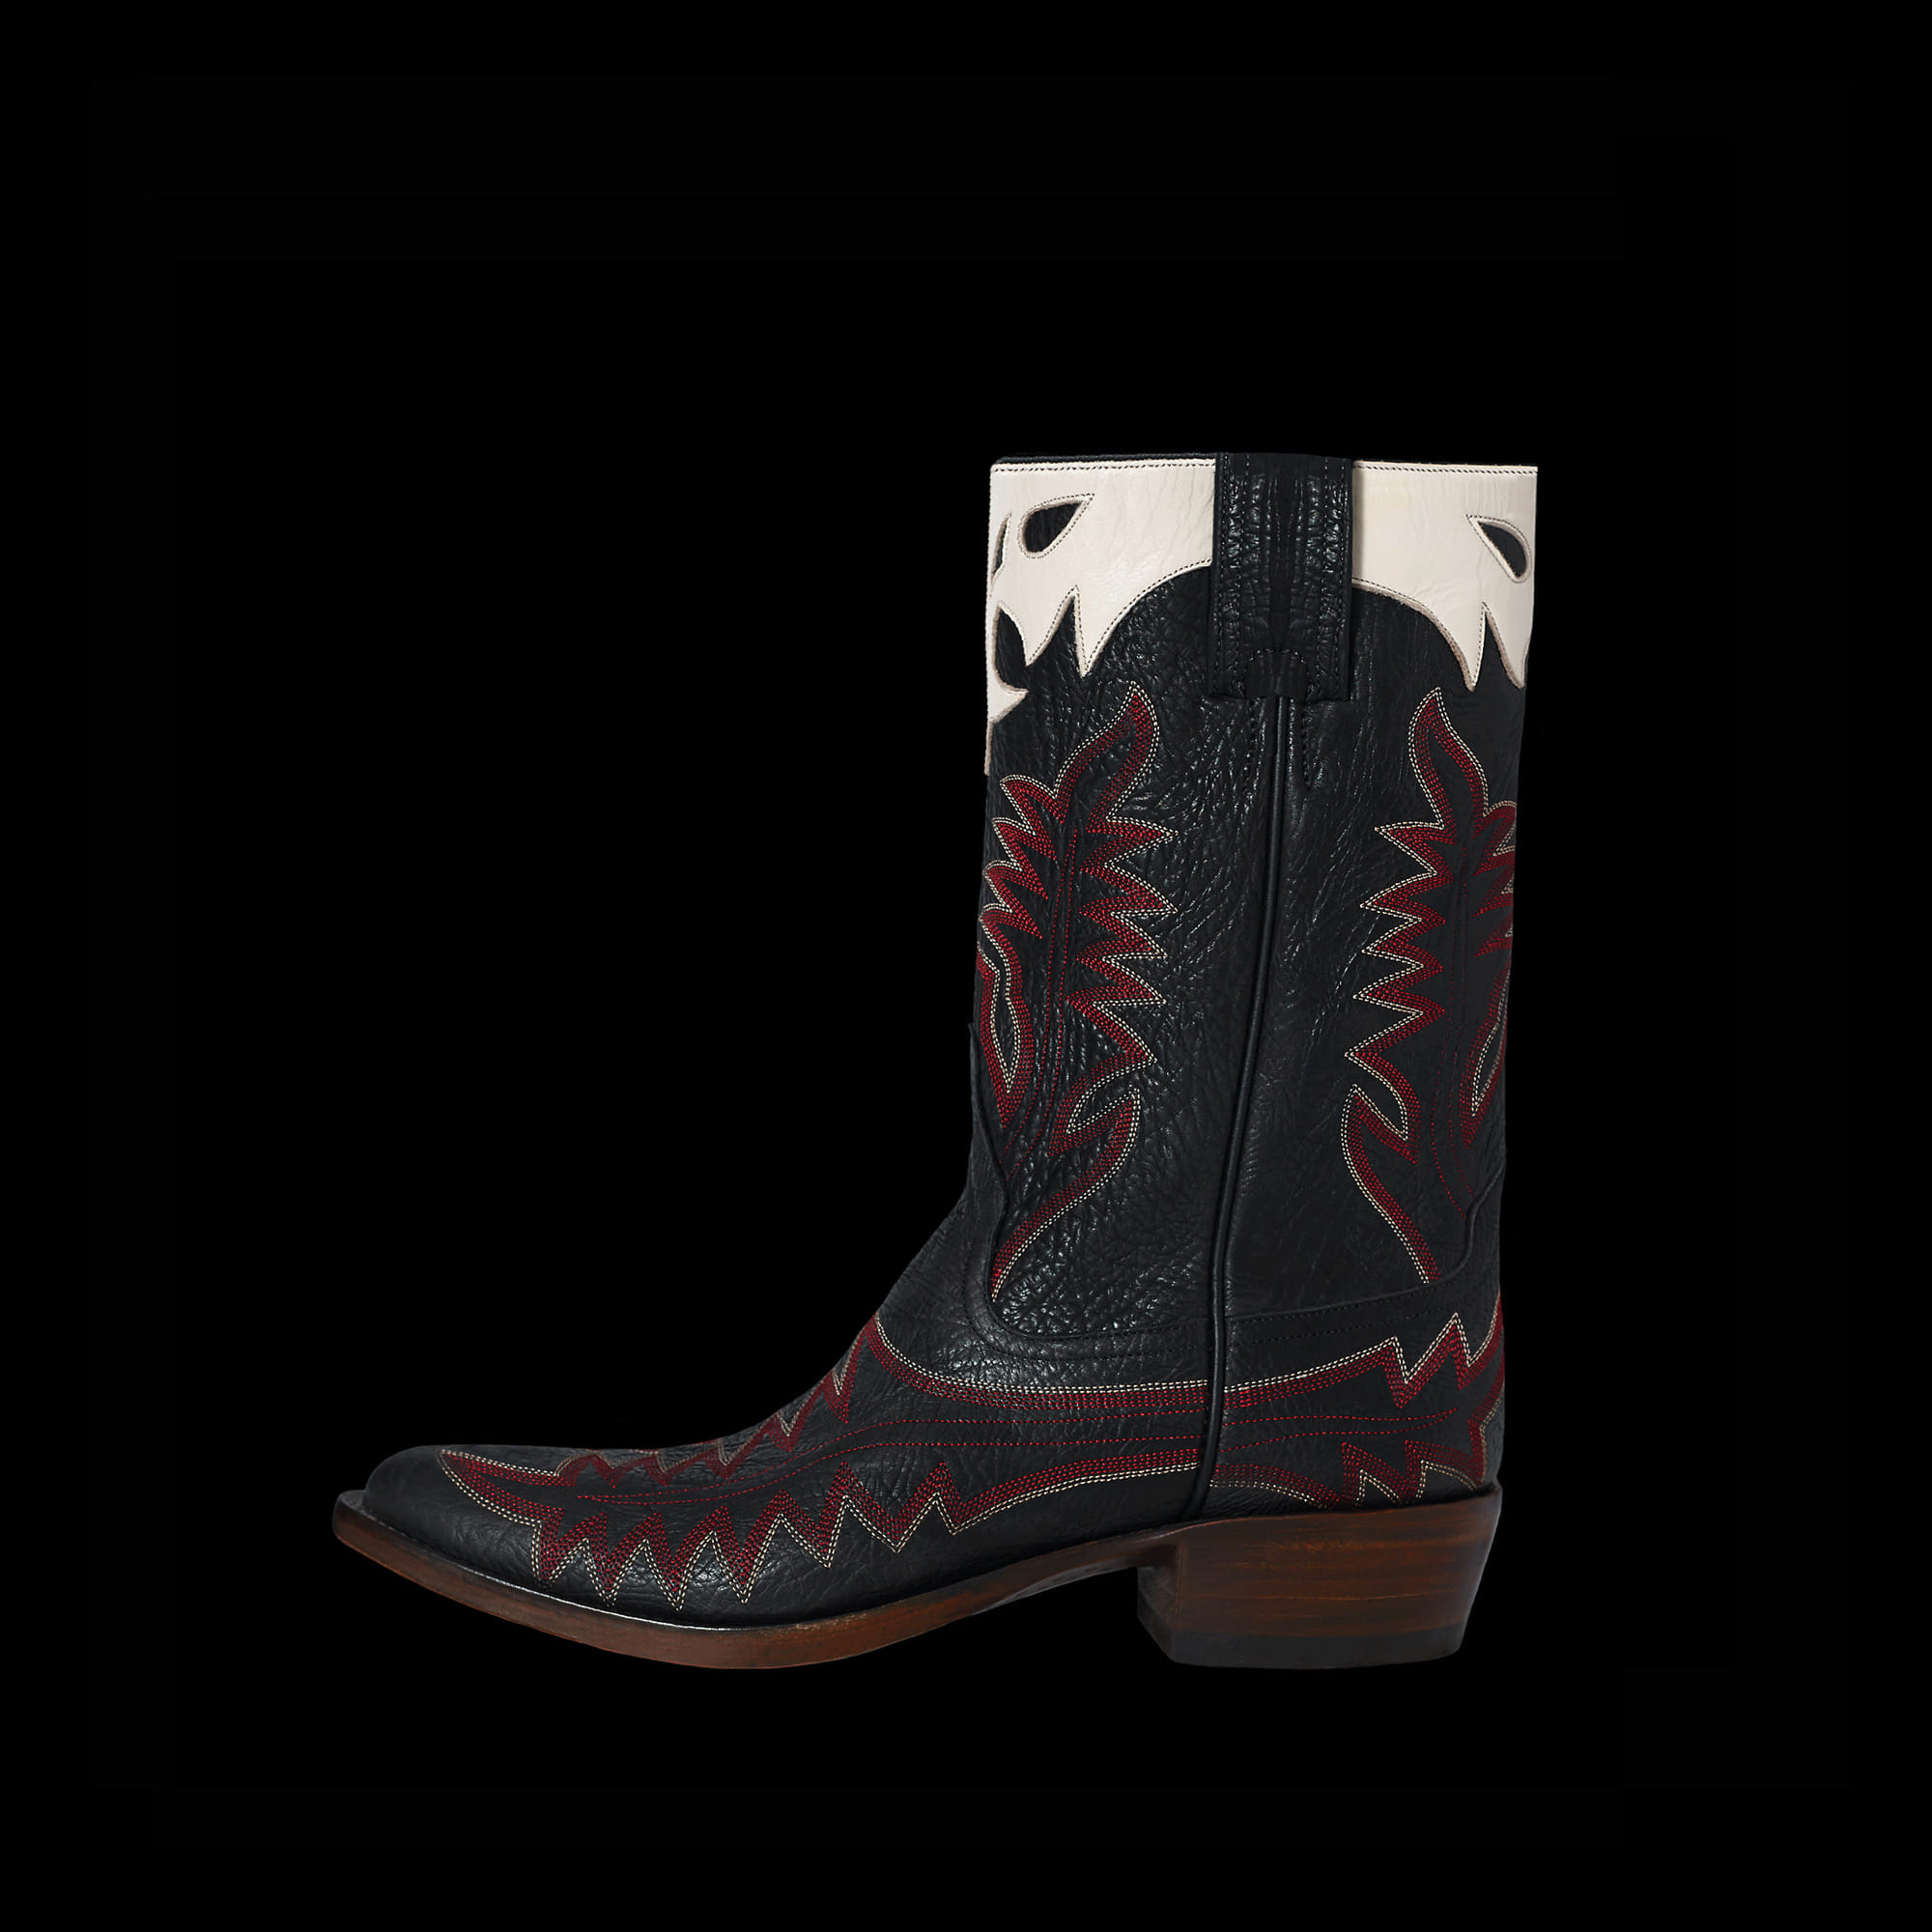 RRLWESTERN LEATHER BOOTS